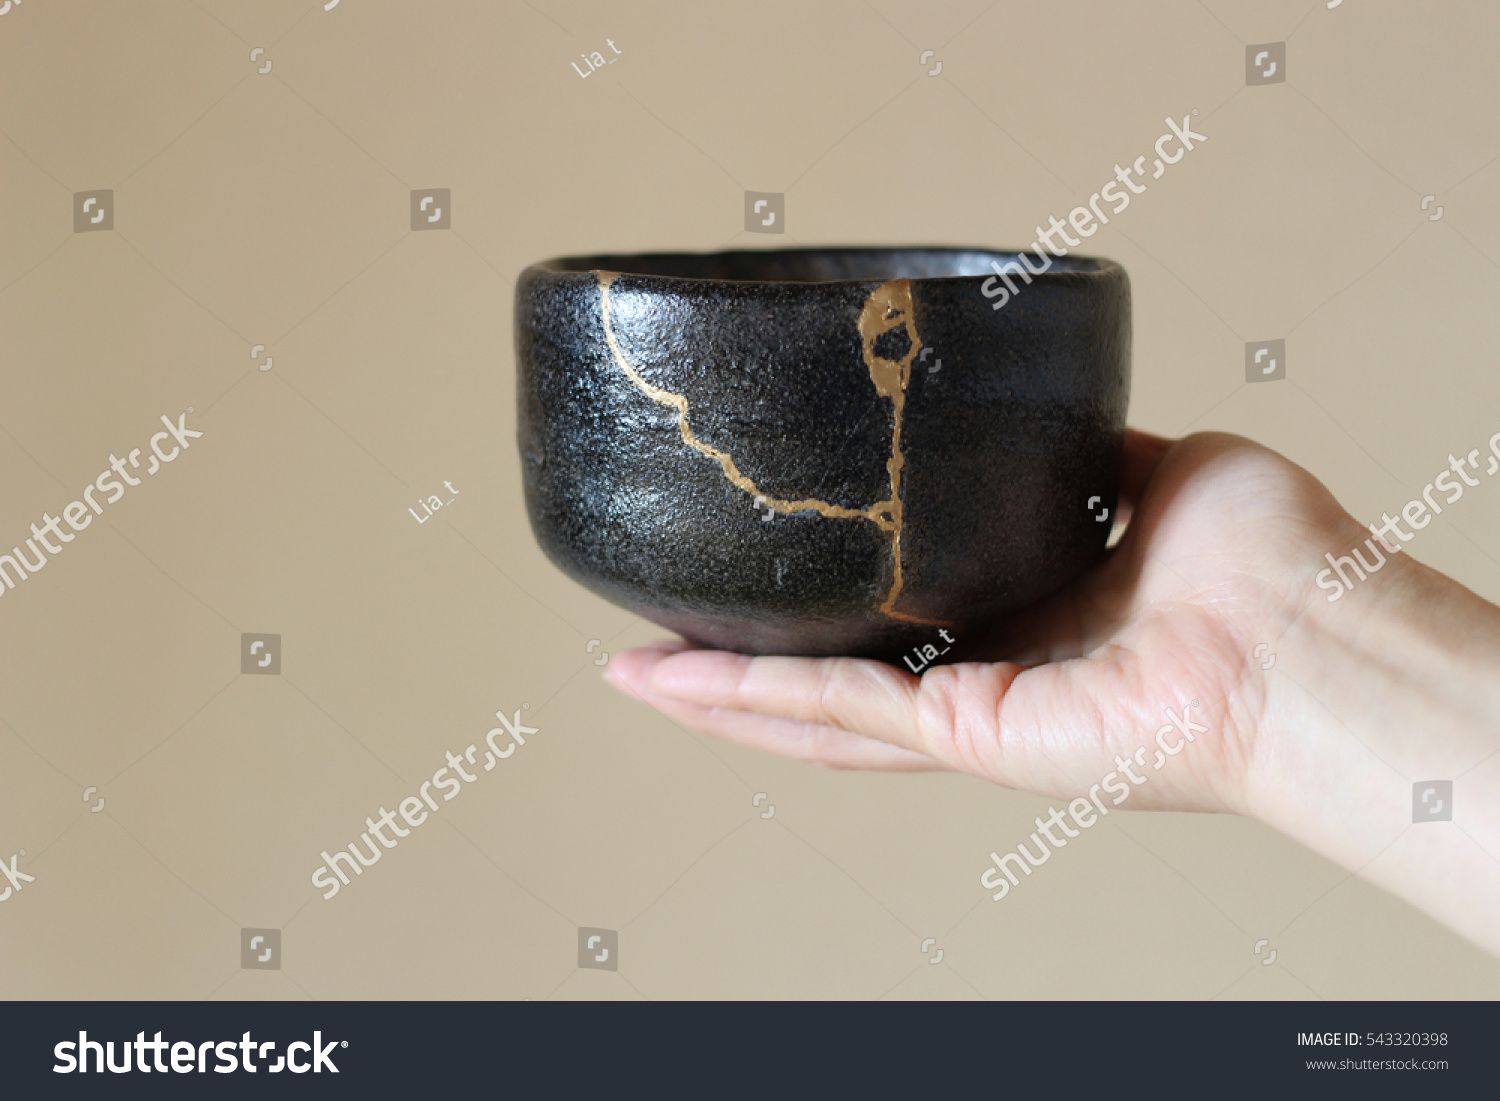 An image of a small, black Japanese bowl with a crack running through it. The crack has been mended or filled in with gold.